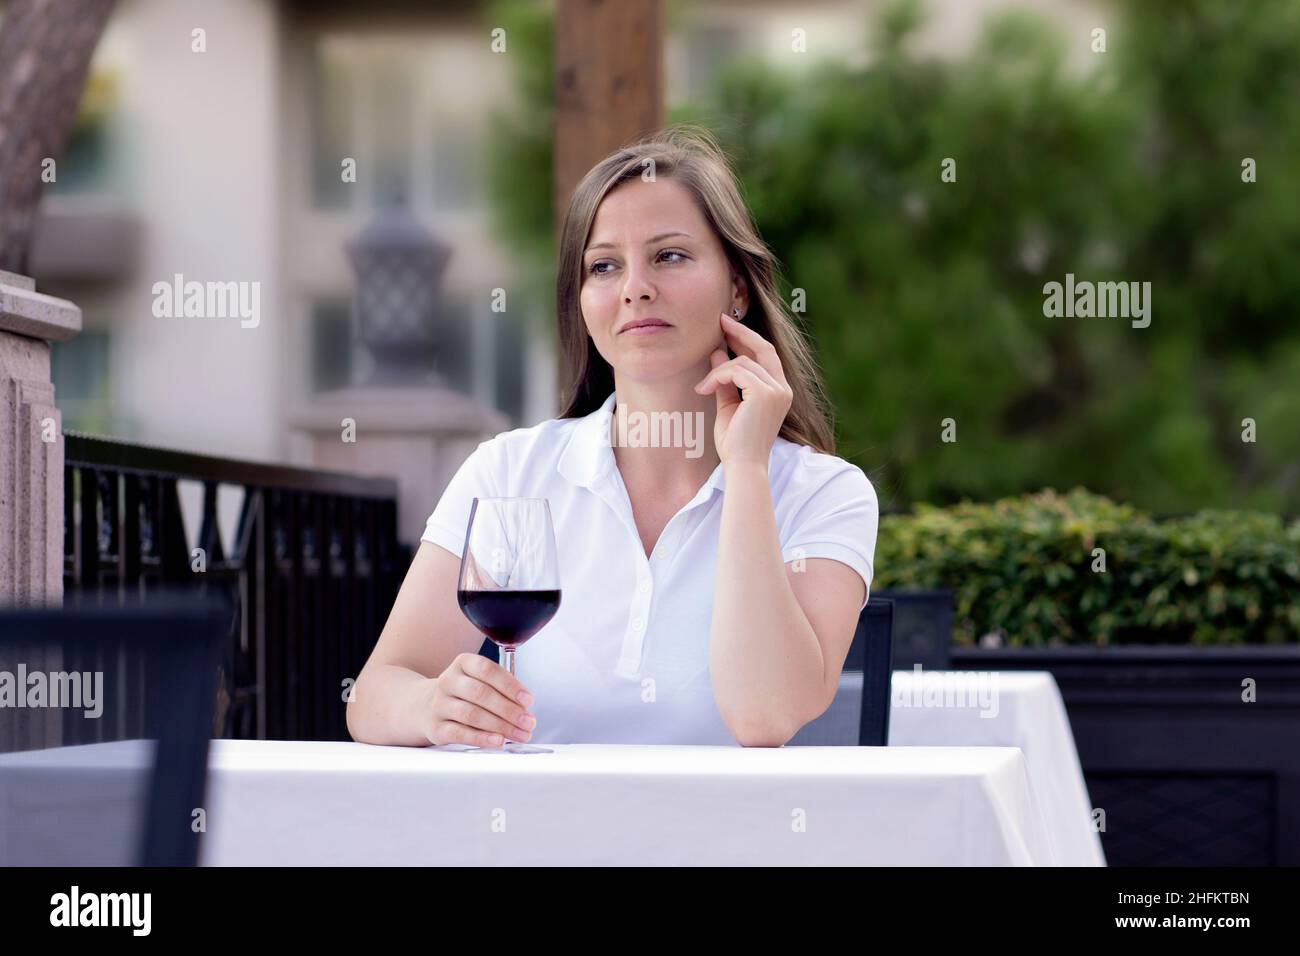 a woman is sitting alone at a table in a summer cafe or restaurant, holding a glass of red wine in her hands. expectation or a dreamy romantic mood. Stock Photo